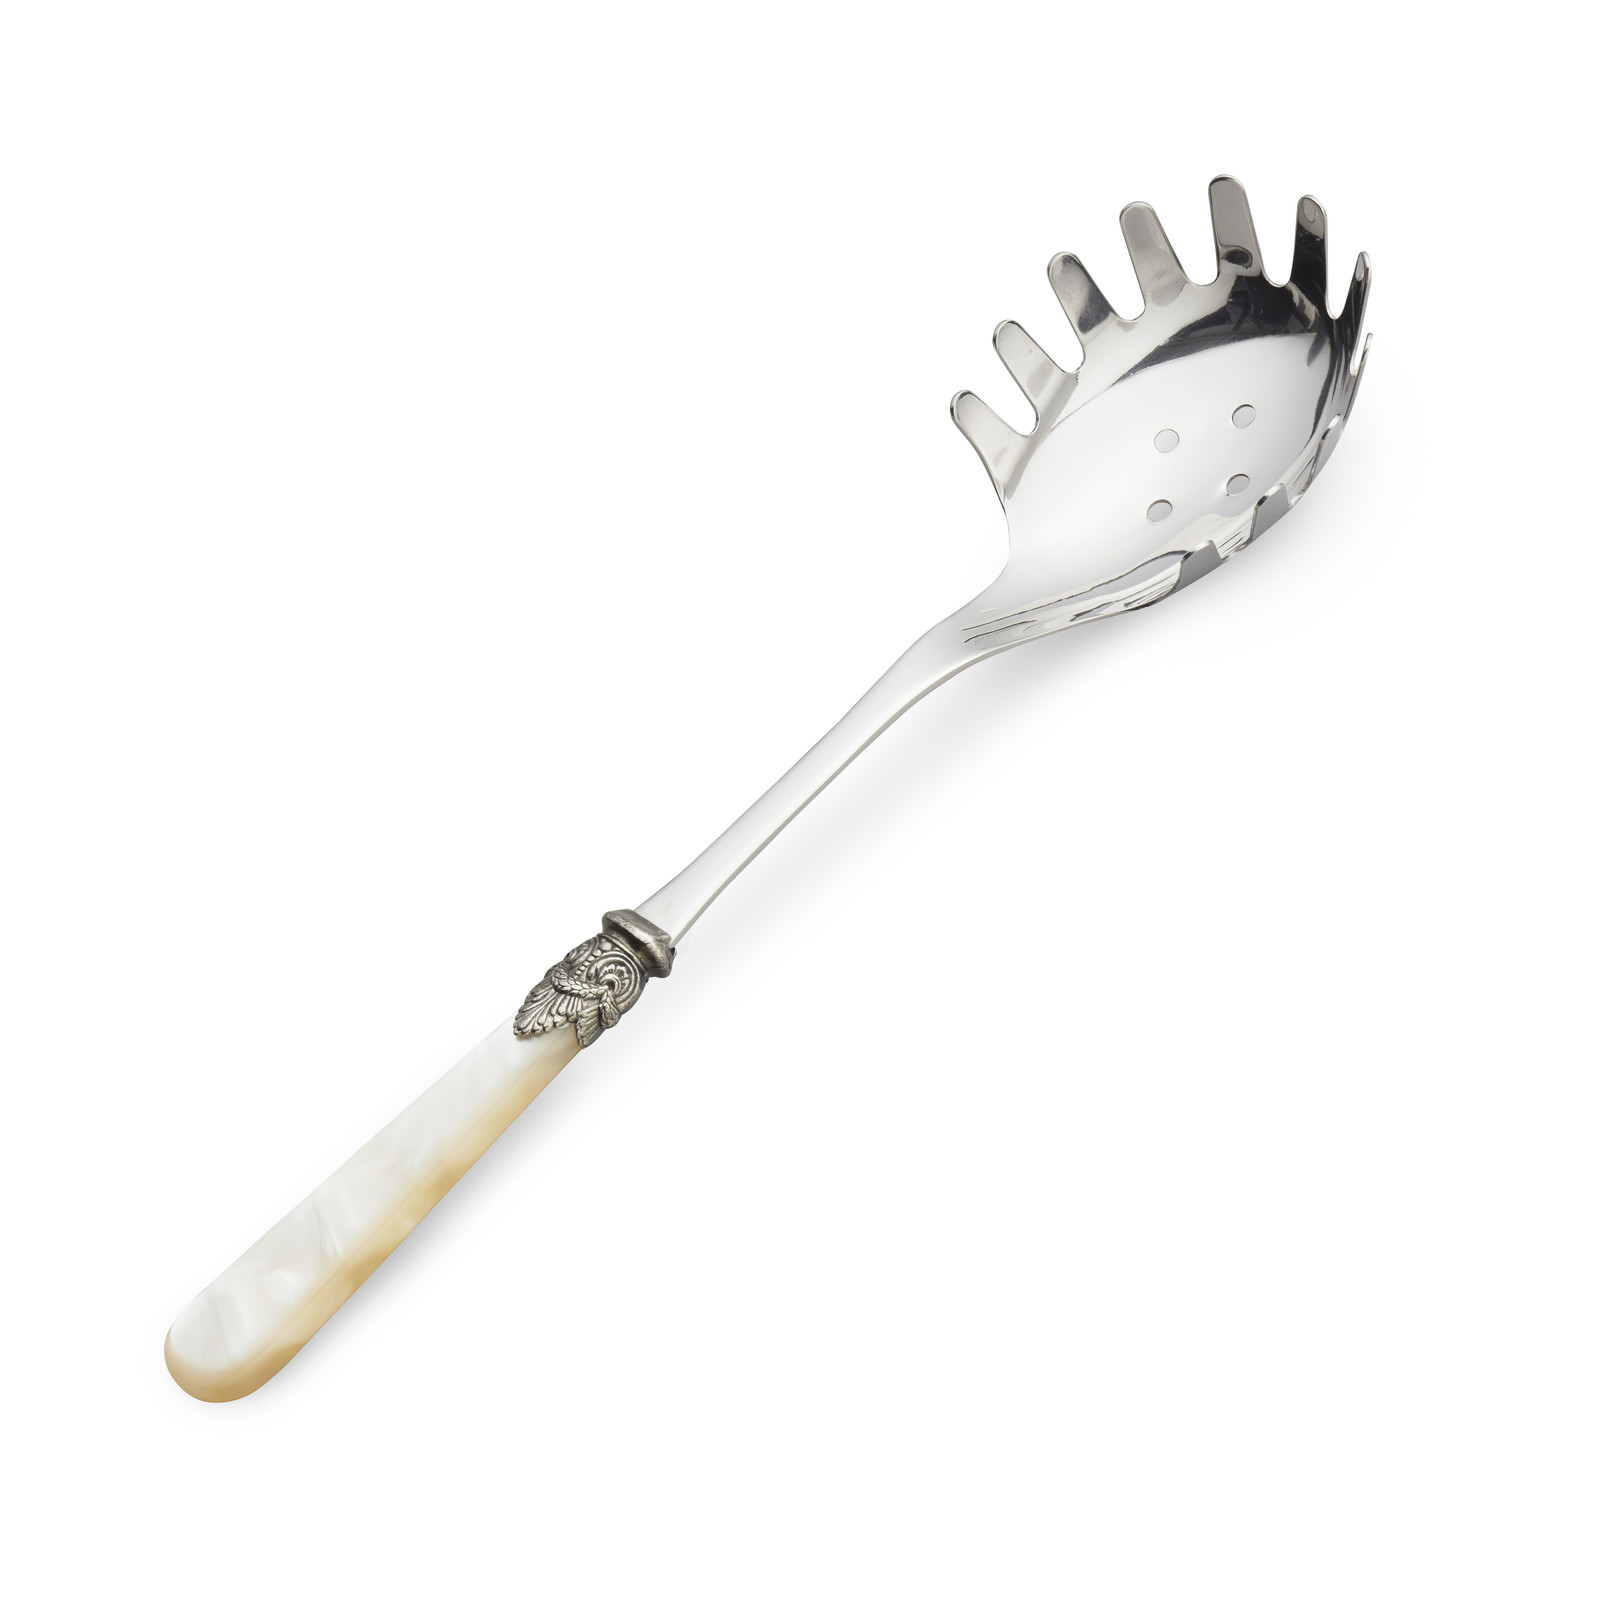 https://cdn.webshopapp.com/shops/295052/files/317521914/1600x1600x2/spaghetti-spoon-noodle-spoon-ivory-with-mother-of.jpg